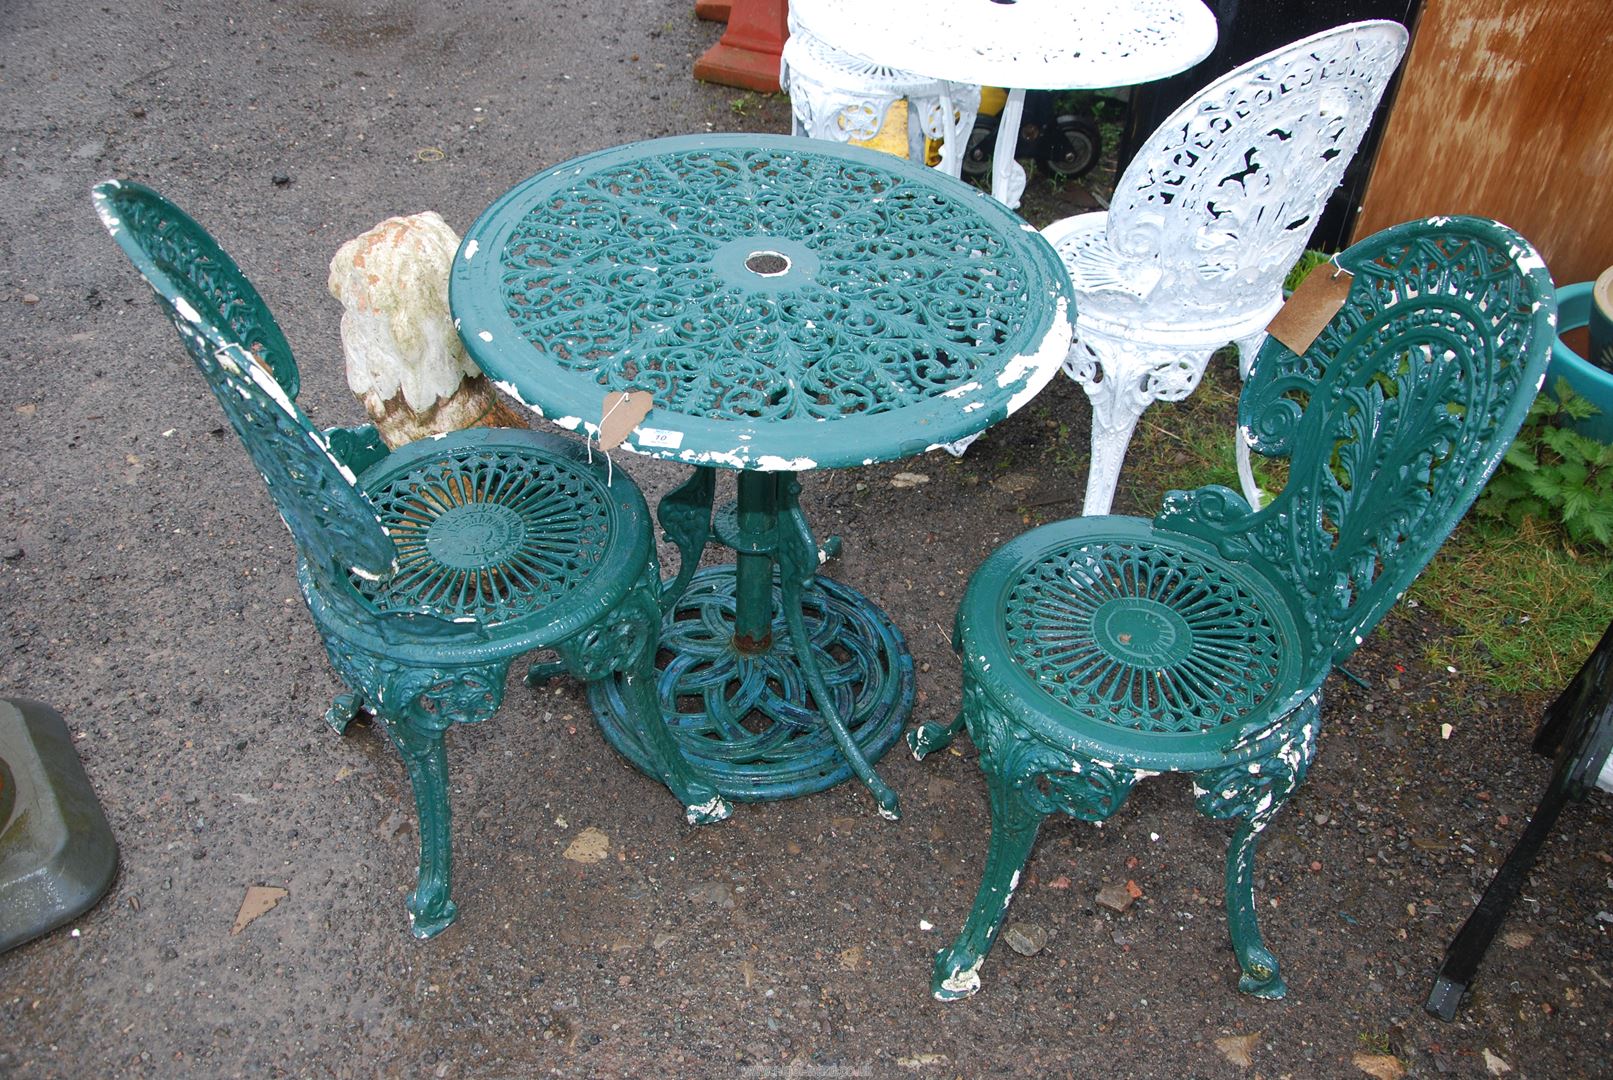 A circular Aluminium table and two chairs painted green, 27" high x 25 1/2" high.